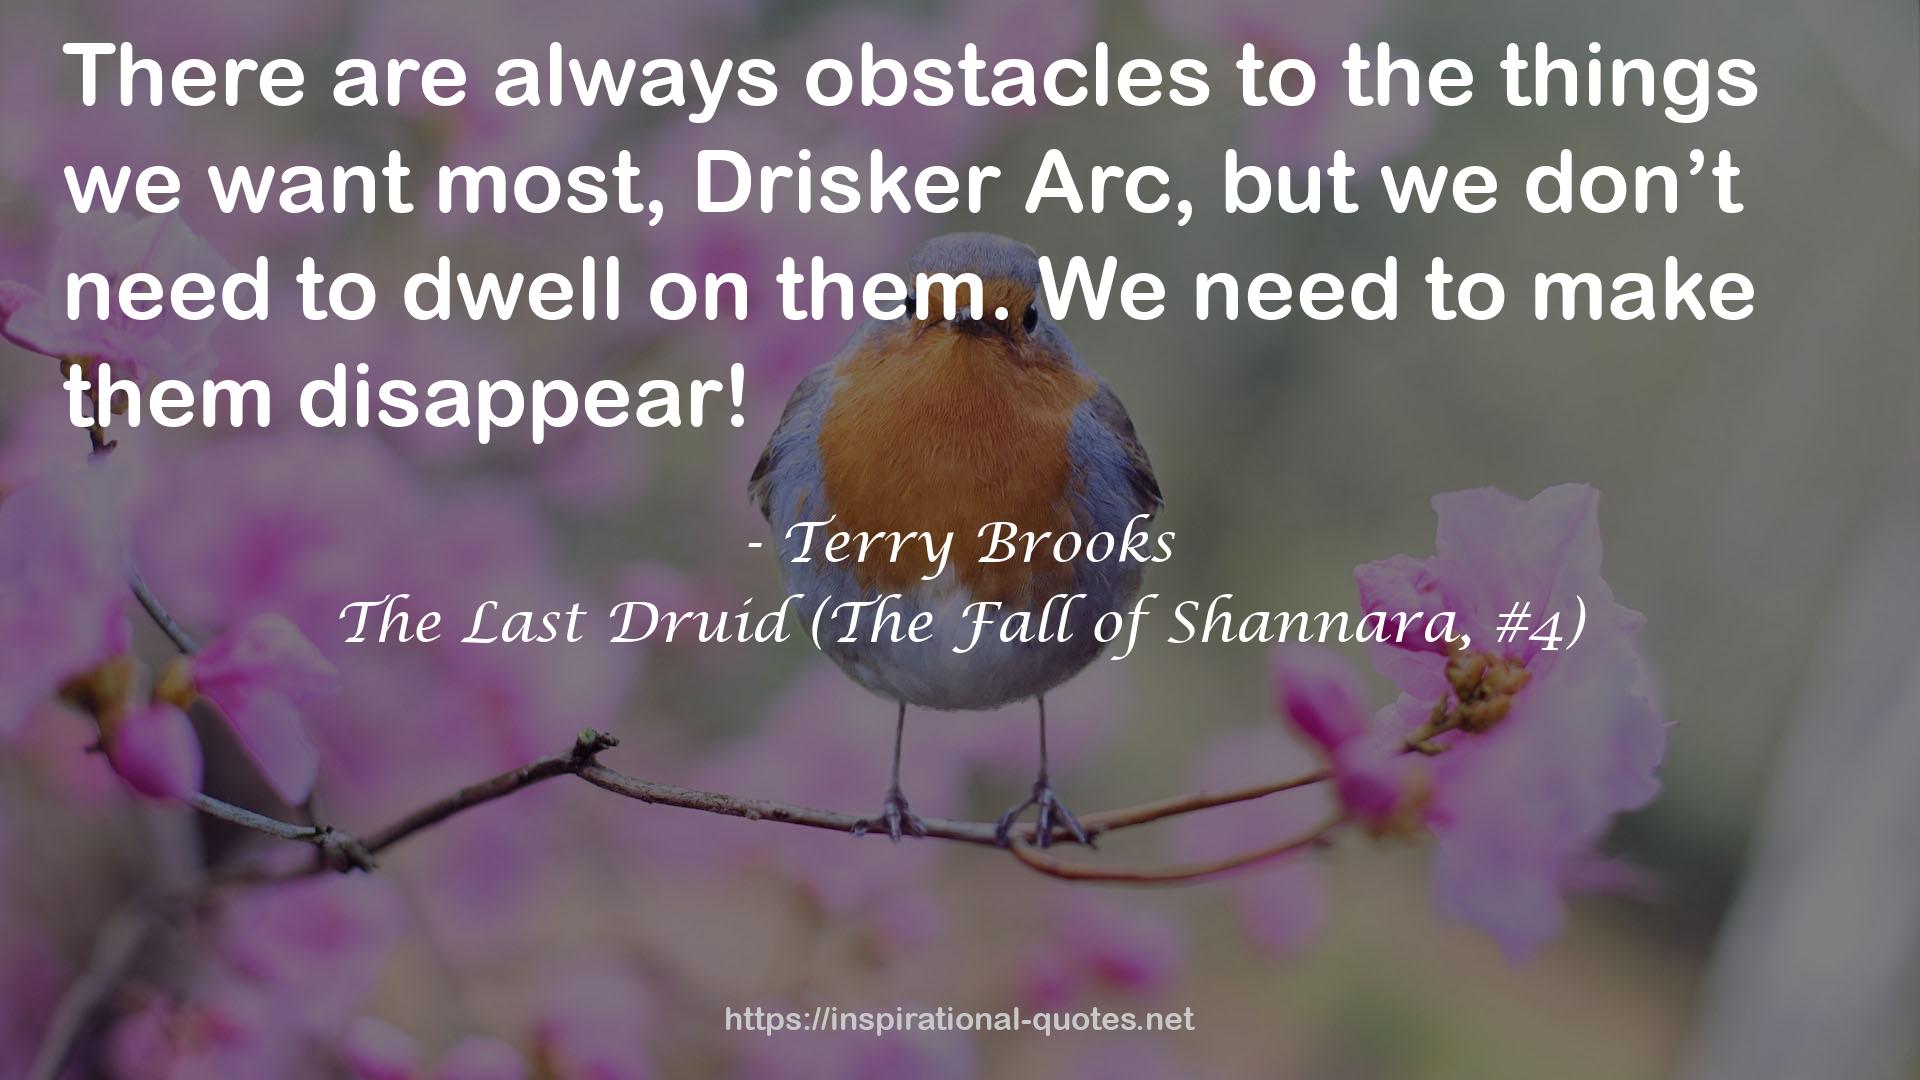 The Last Druid (The Fall of Shannara, #4) QUOTES